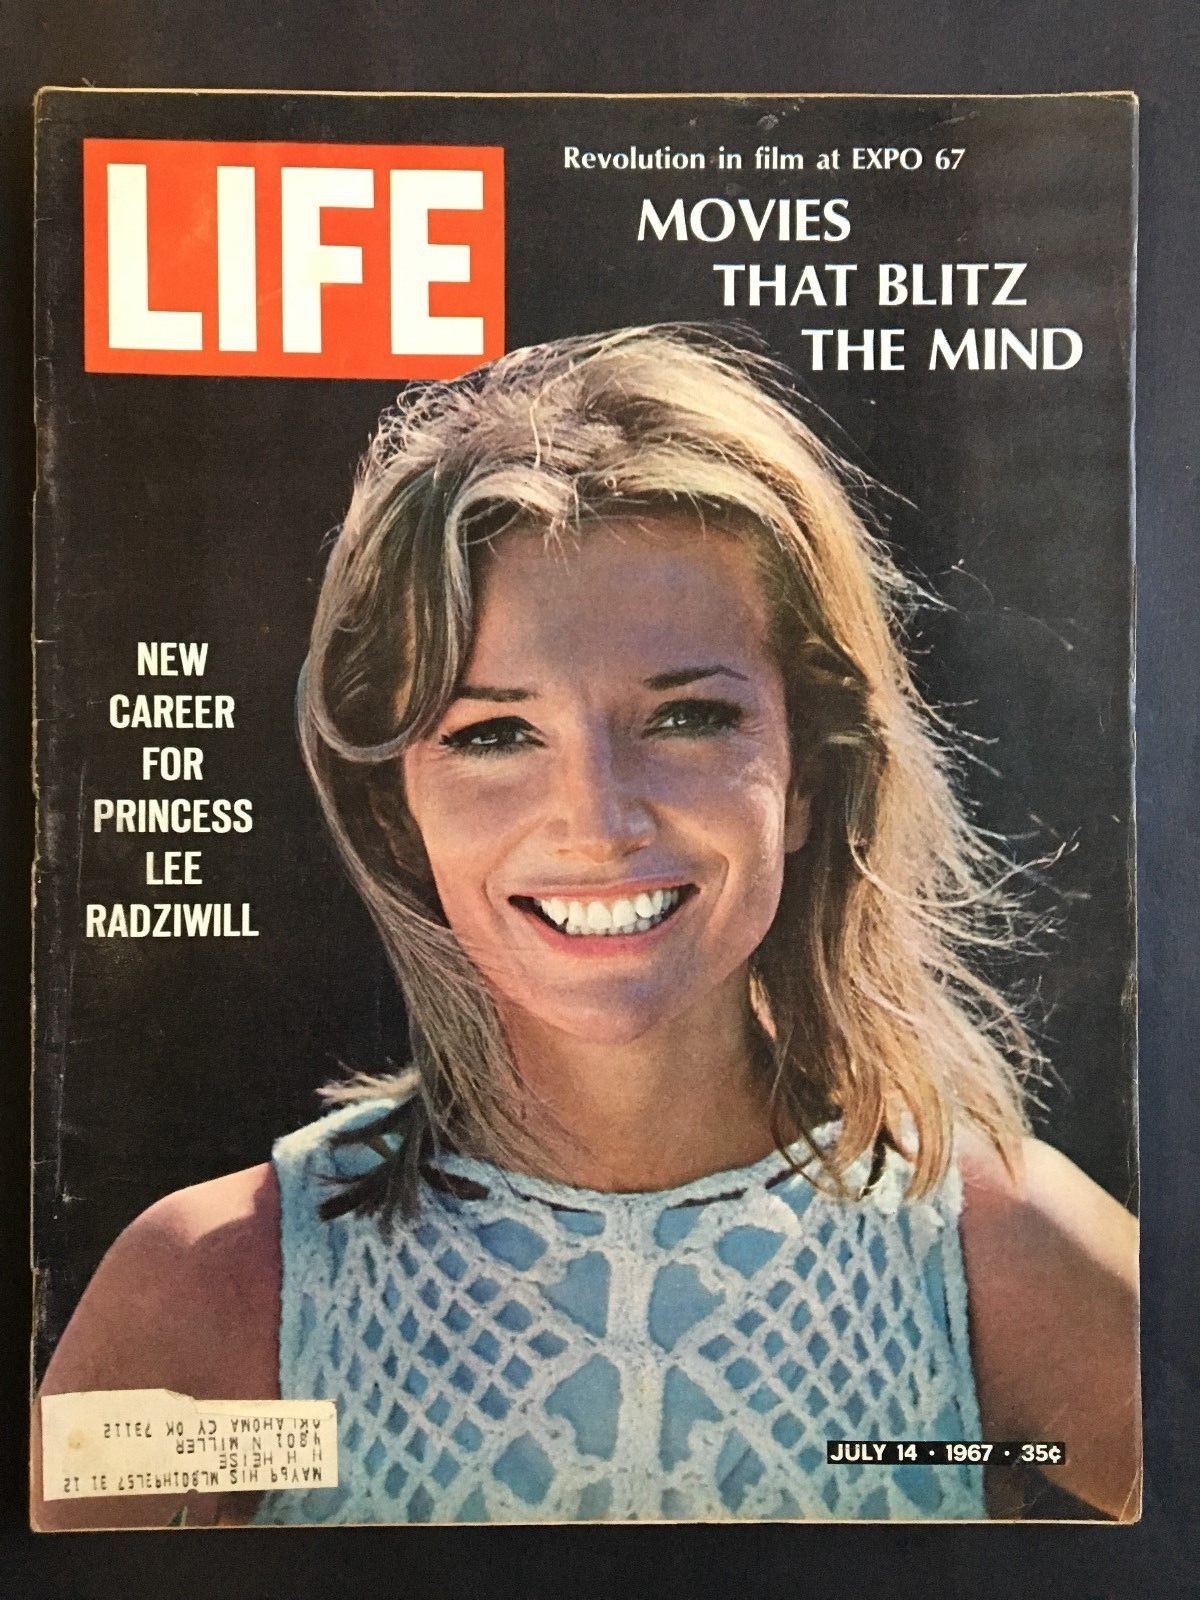 Pop '67!: At the Newsstand: Magazine covers from July 1967